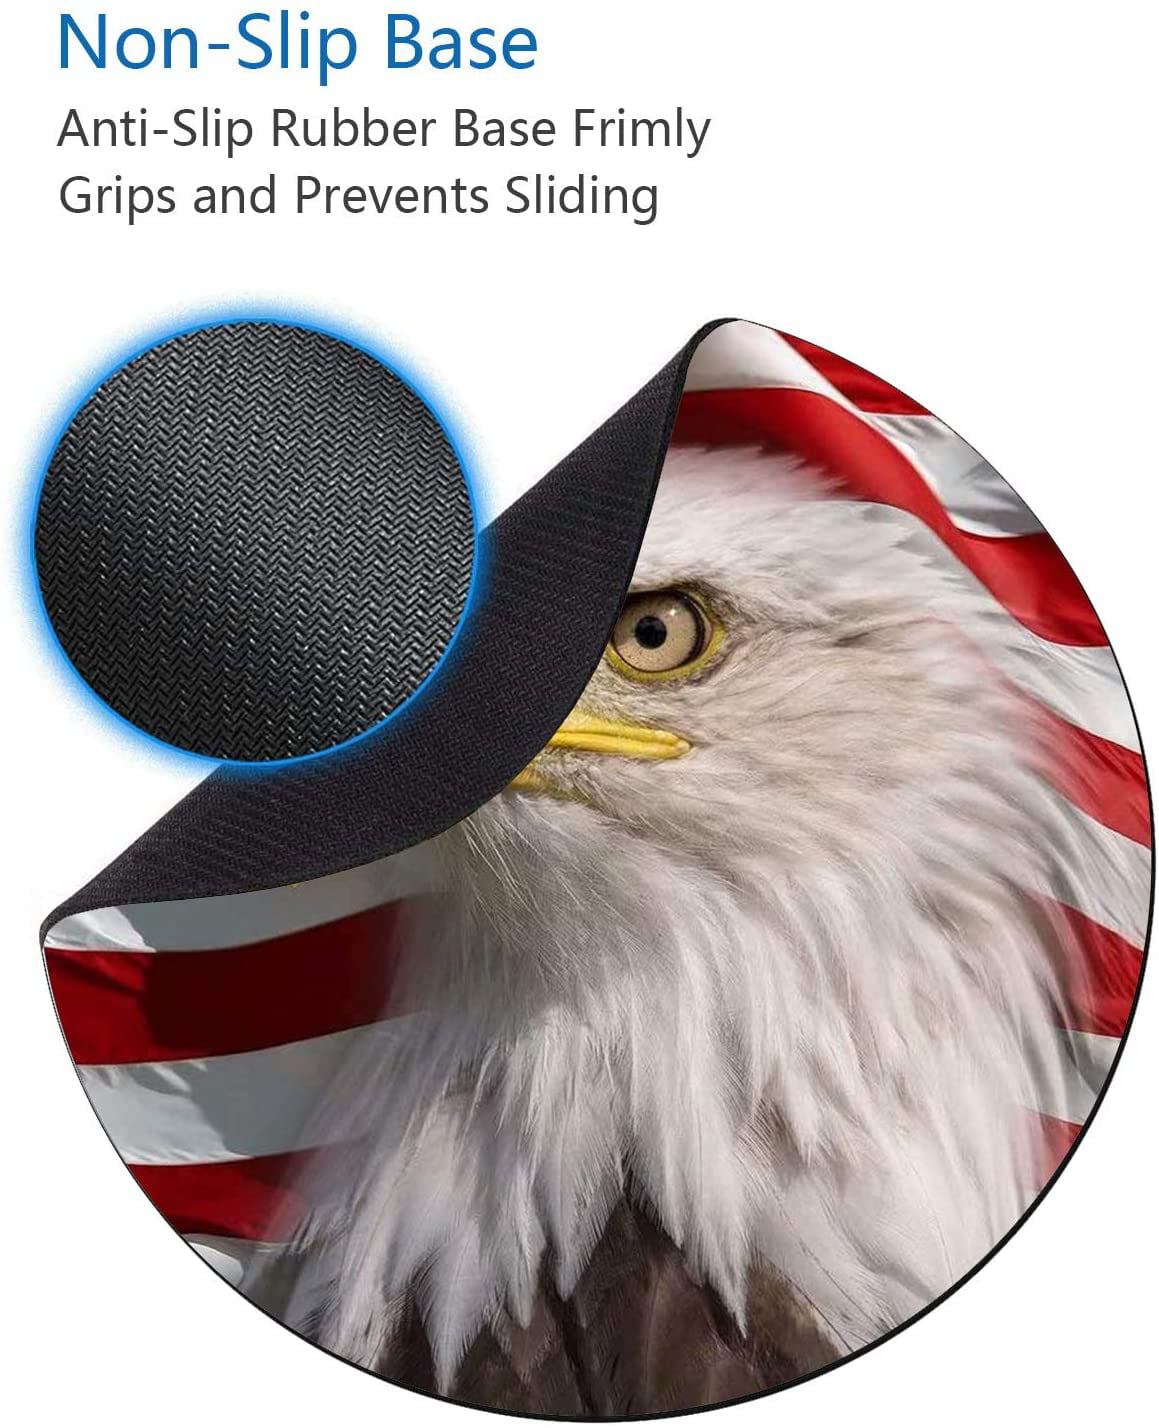 AMERICAN BALD EAGLE WITH AMERICAN FLAG SET OF 4 COASTERS RUBBER WITH FABRIC TOP 